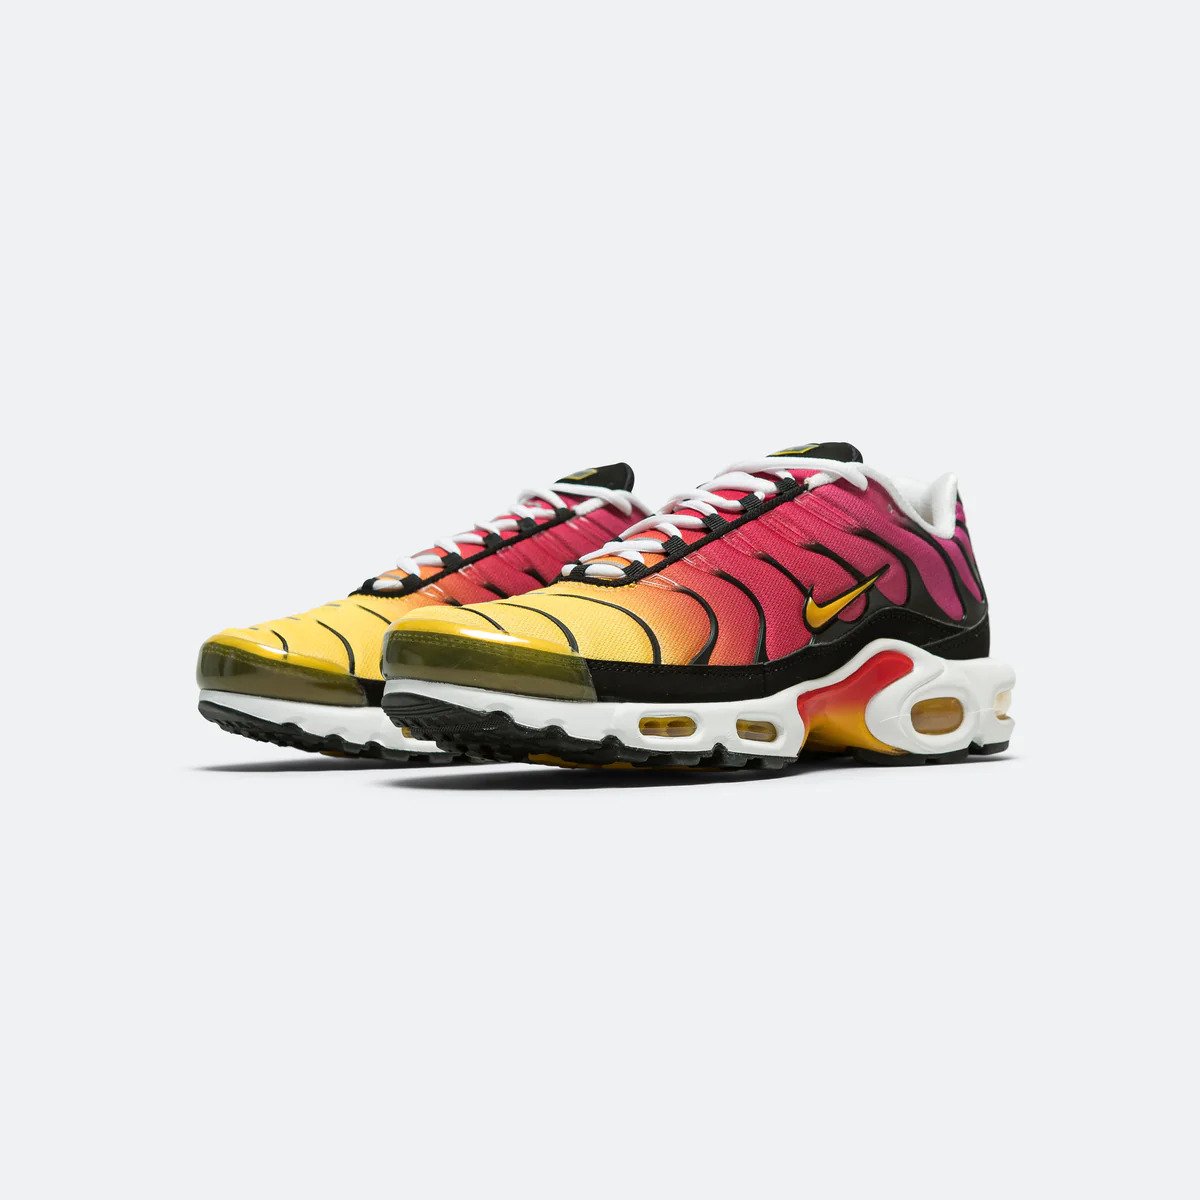 Nike Air Max Plus OG Gold Raspberry Red DX0755-600 Full Shoes